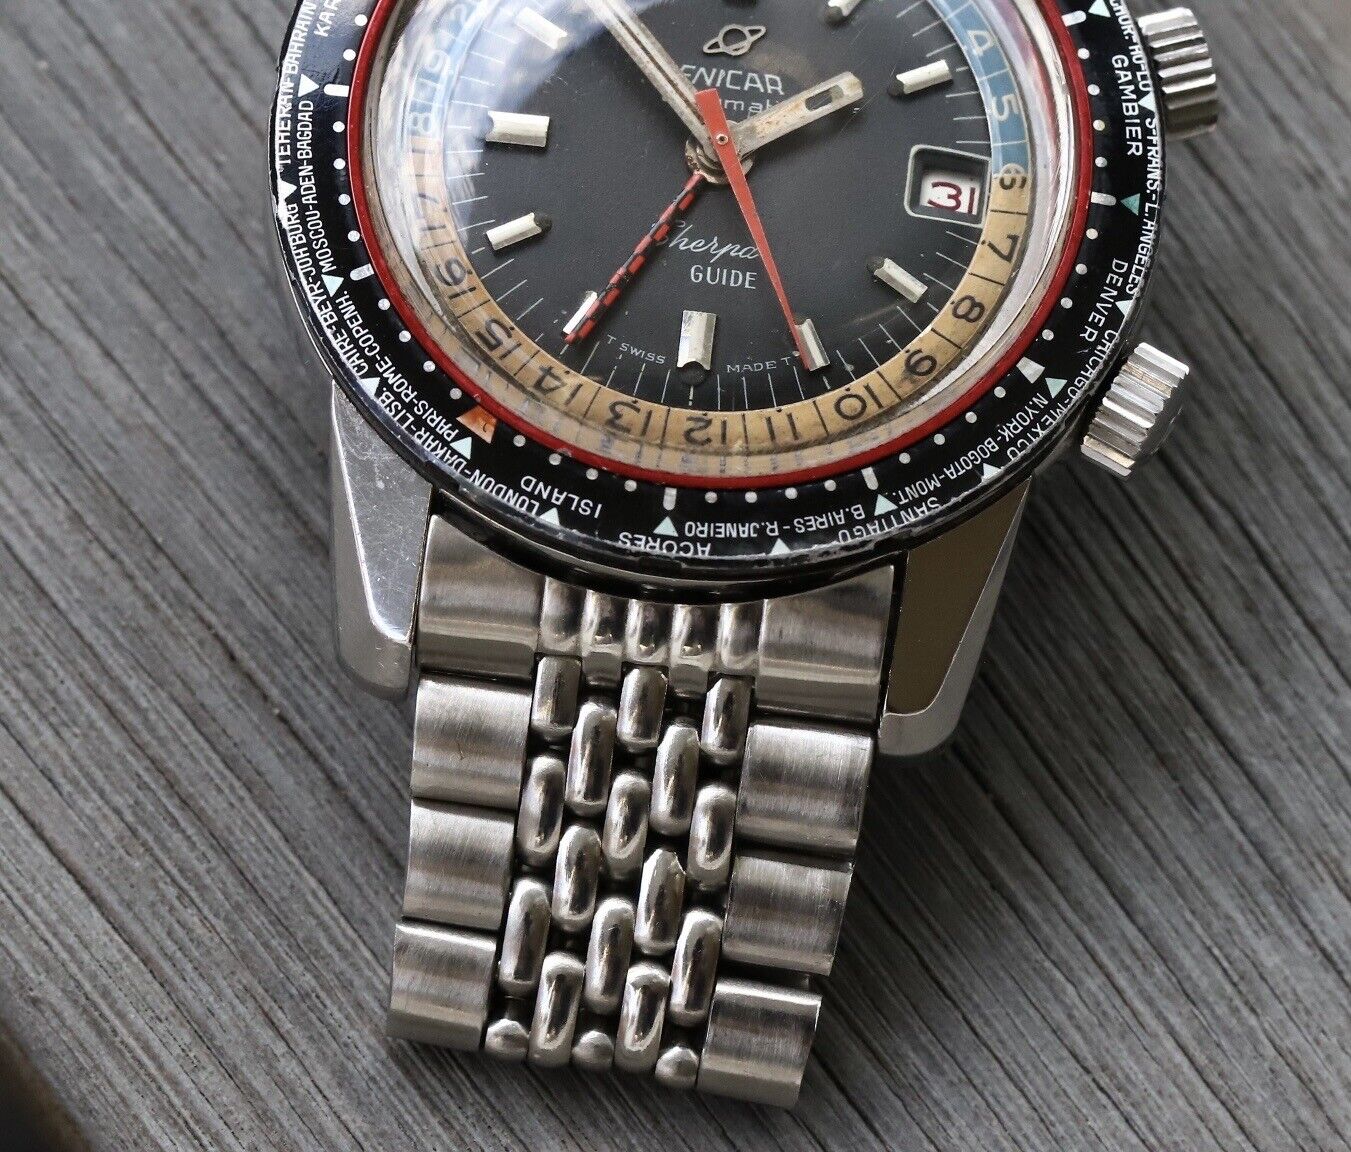 Enicar Sherpa Guide 600 GMT World-Time 148-35-01A